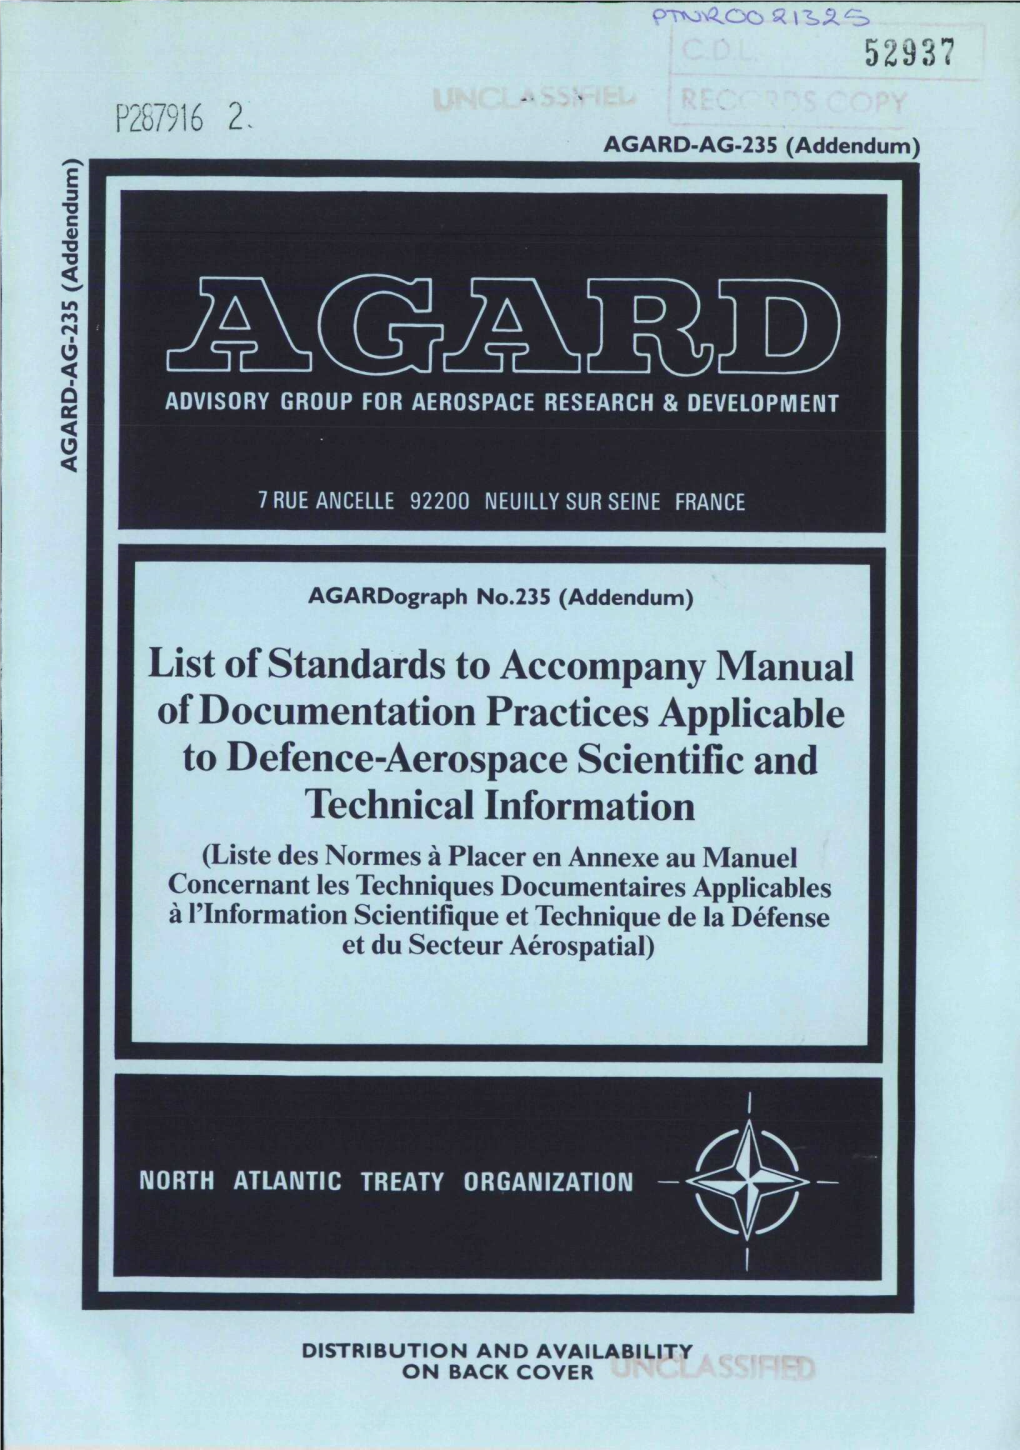 List of Standards to Accompany Manual of Documentation Practices